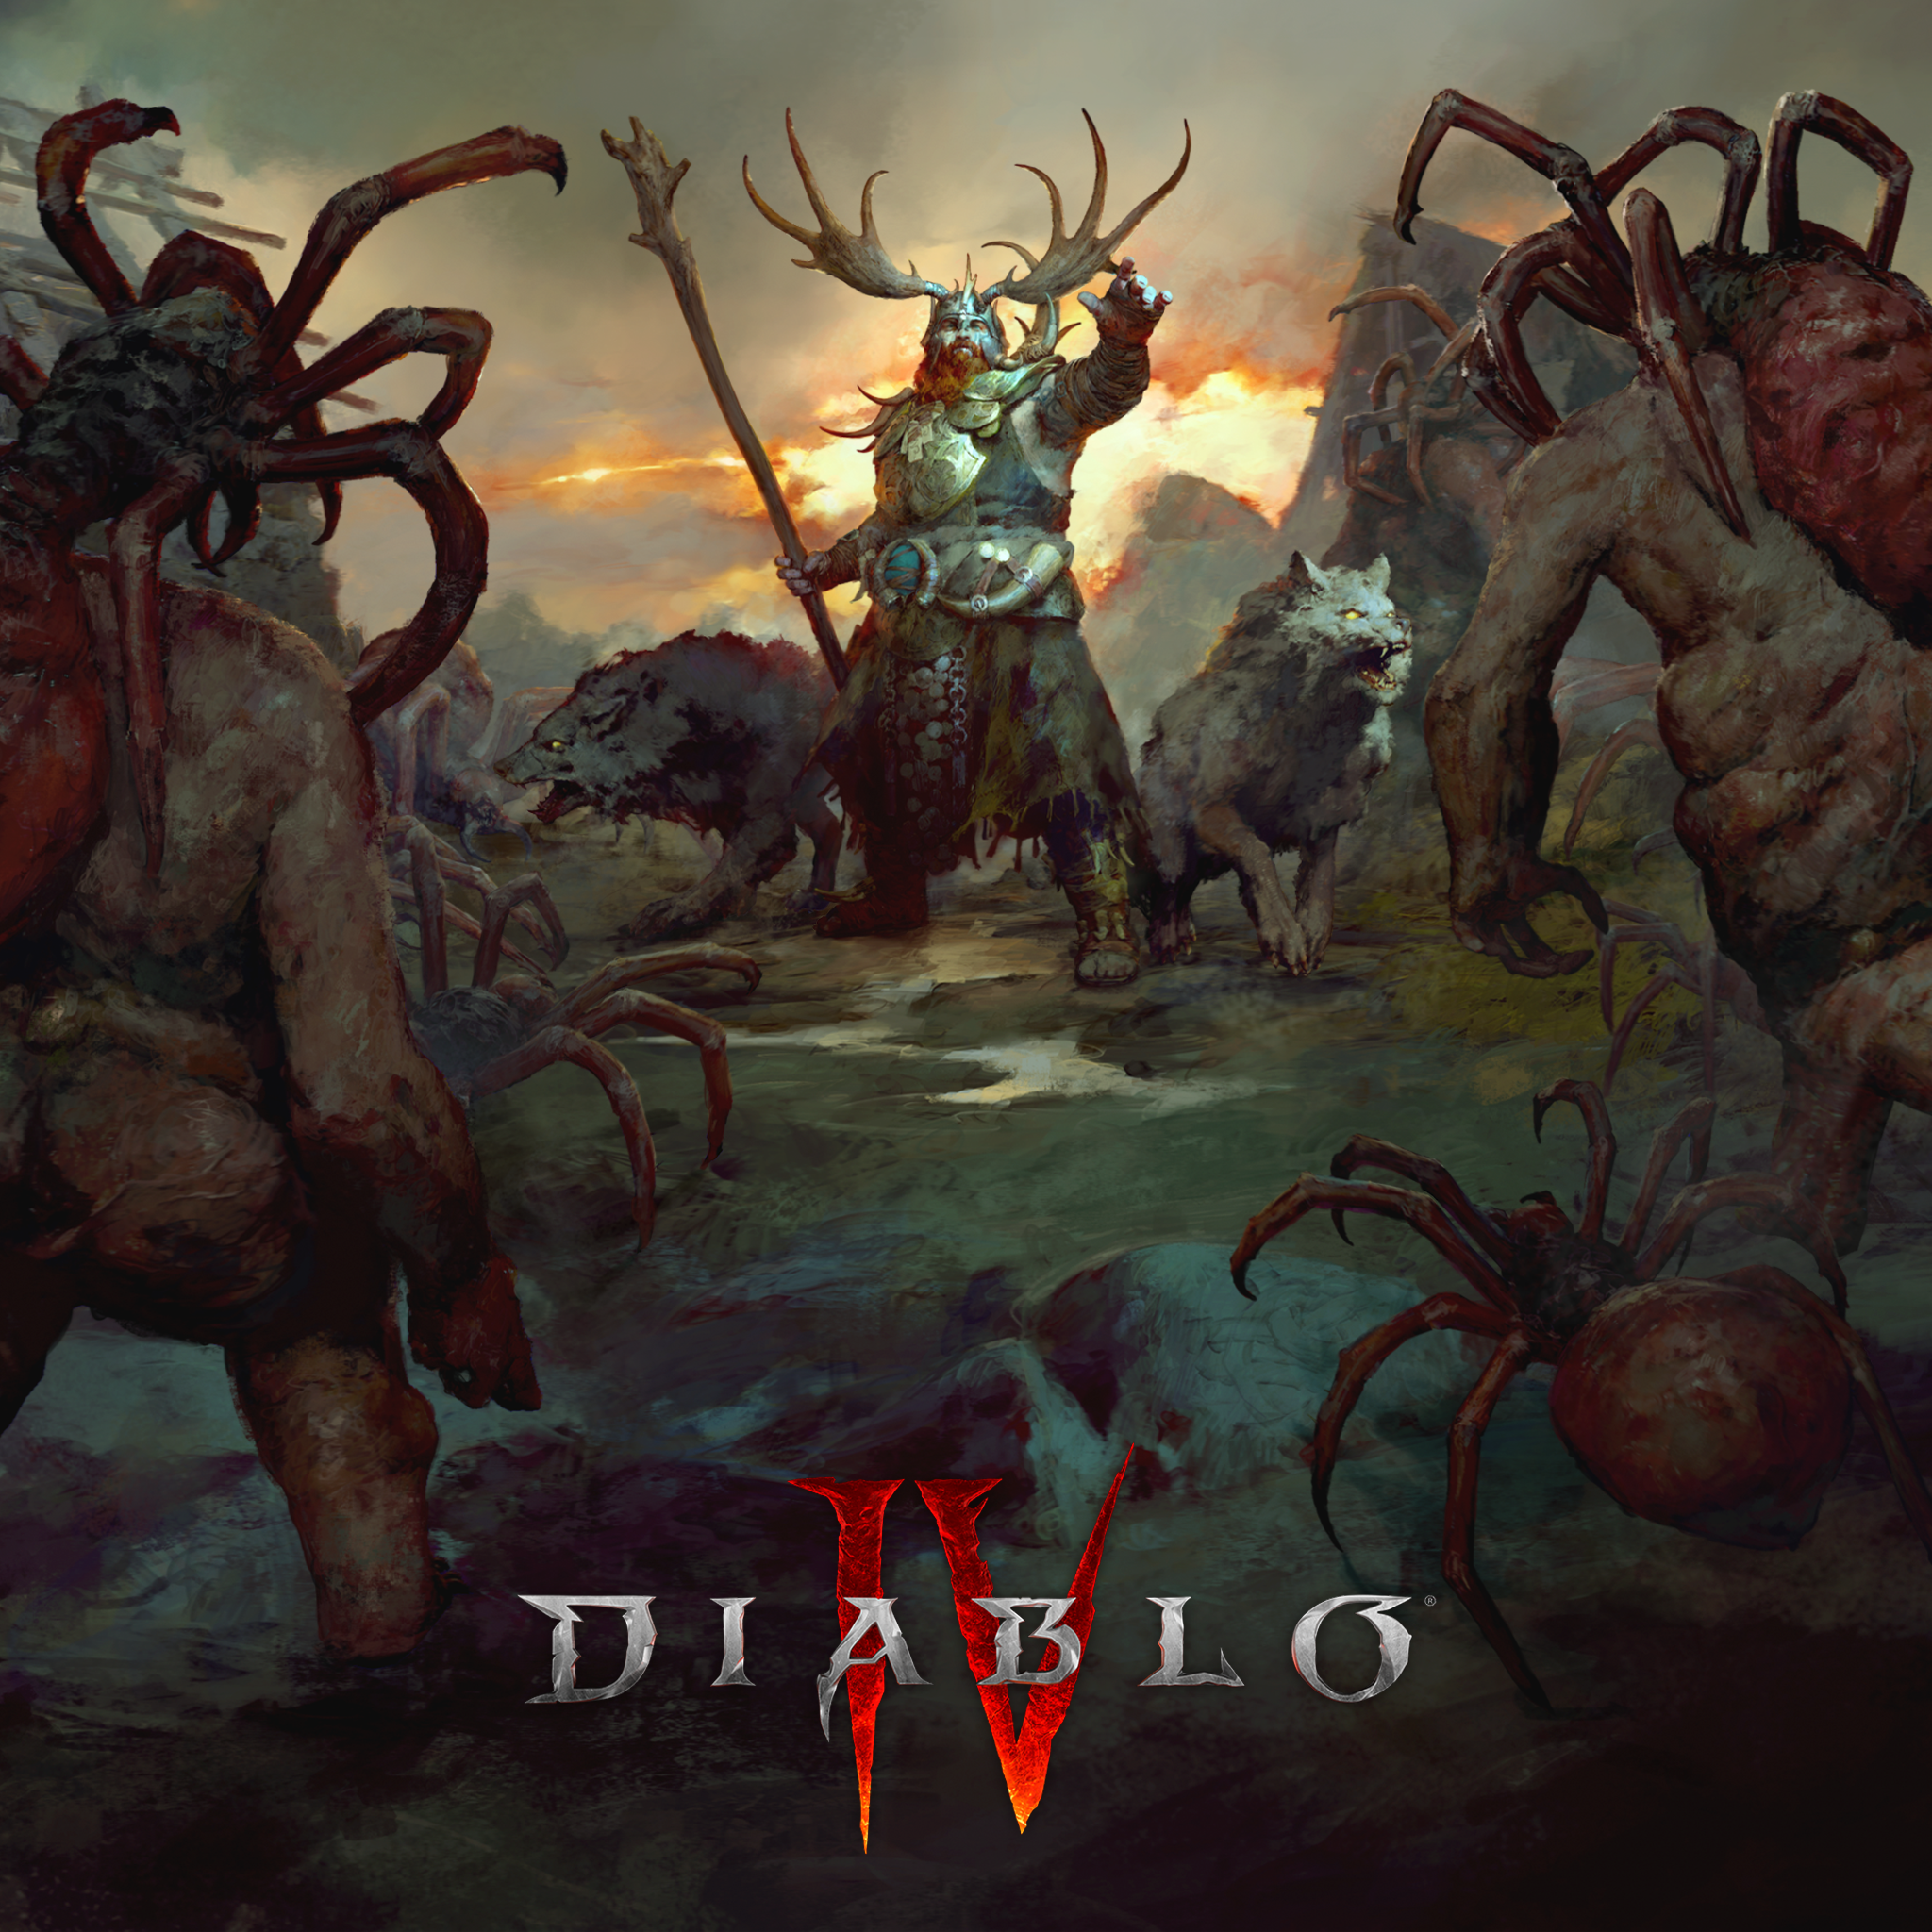 A Diablo 4 druid, accompanied by wolves and wearing giant antlers, raises a hand to ward off encroaching monsteres